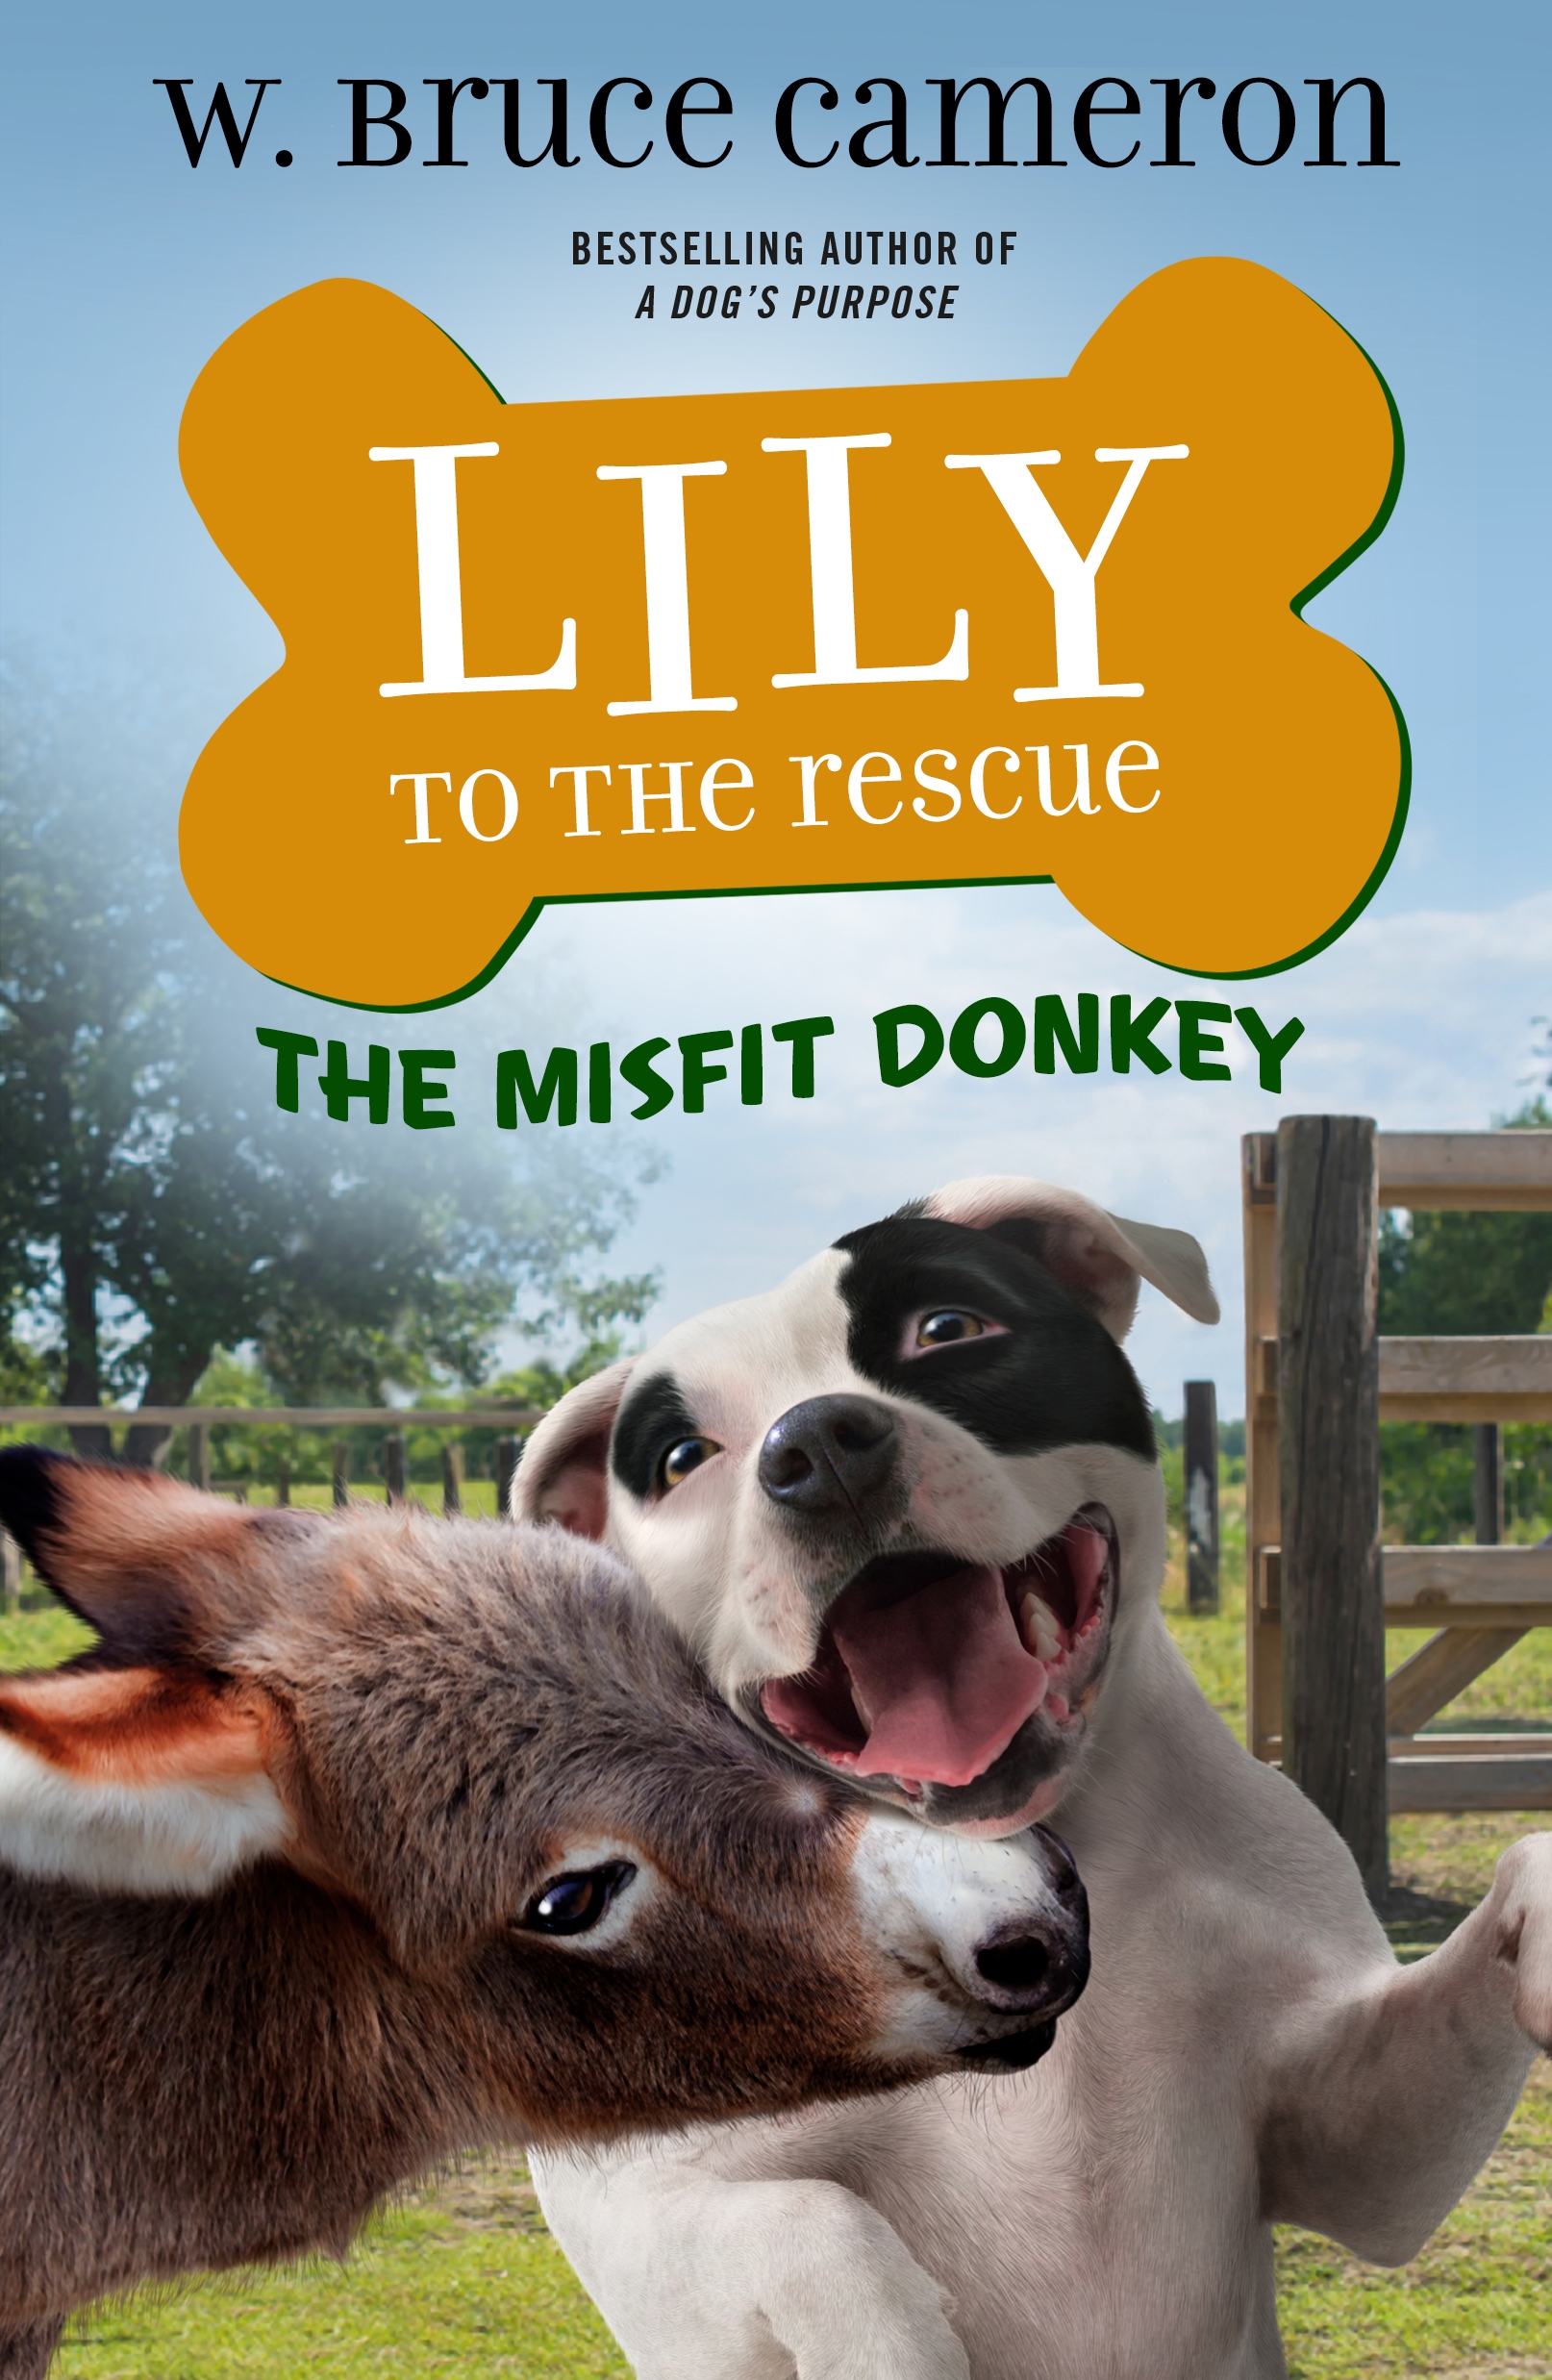 Lily to the Rescue: The Misfit Donkey by W. Bruce Cameron, James Bernardin